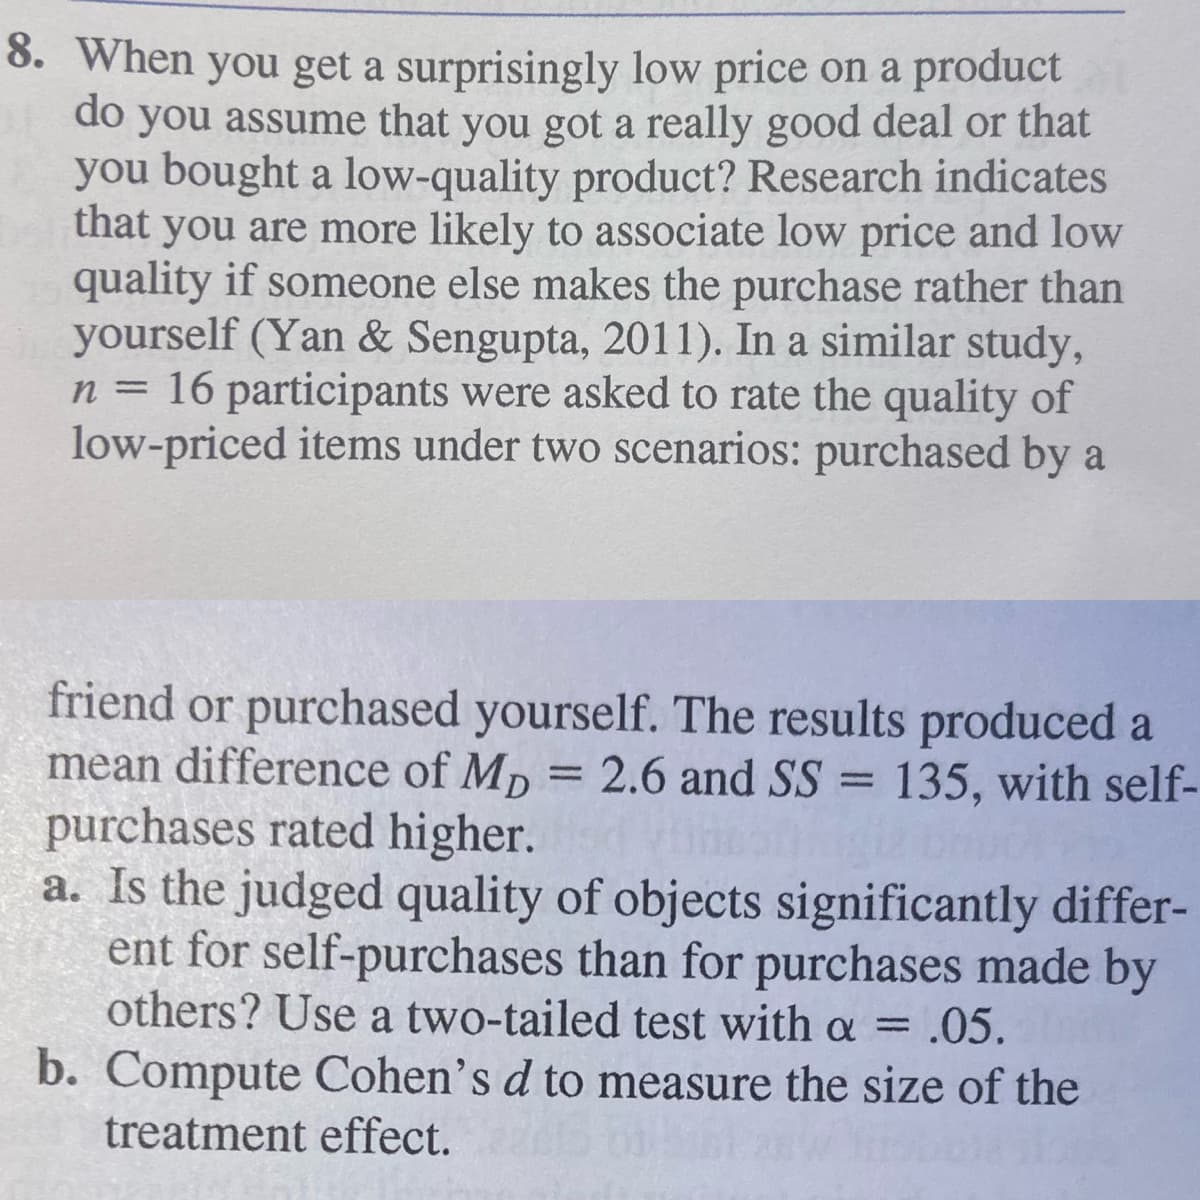 8. When you get a surprisingly low price on a product
do you assume that you got a really good deal or that
you bought a low-quality product? Research indicates
that
you are more likely to associate low price and low
quality if someone else makes the purchase rather than
yourself (Yan & Sengupta, 2011). In a similar study,
n = 16 participants were asked to rate the quality of
low-priced items under two scenarios: purchased by a
friend or purchased yourself. The results produced a
mean difference of Mp = 2.6 and SS = 135, with self-
purchases rated higher.
a. Is the judged quality of objects significantly differ-
ent for self-purchases than for purchases made by
others? Use a two-tailed test with a = .05.
b. Compute Cohen's d to measure the size of the
treatment effect.
